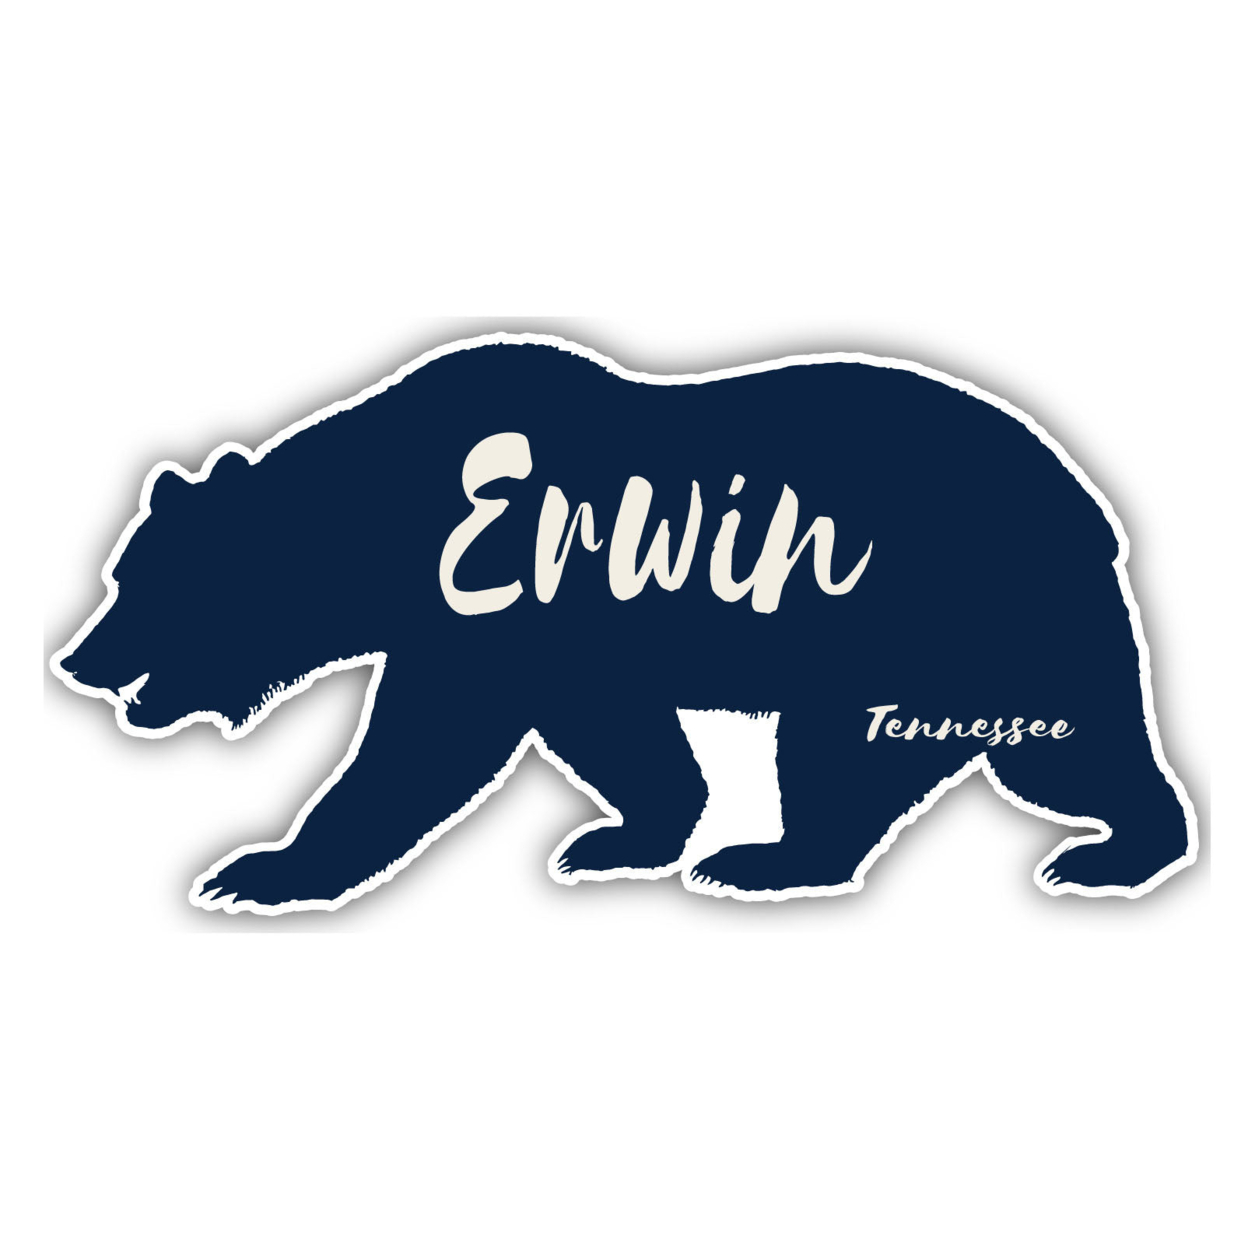 Erwin Tennessee Souvenir Decorative Stickers (Choose Theme And Size) - Single Unit, 8-Inch, Bear